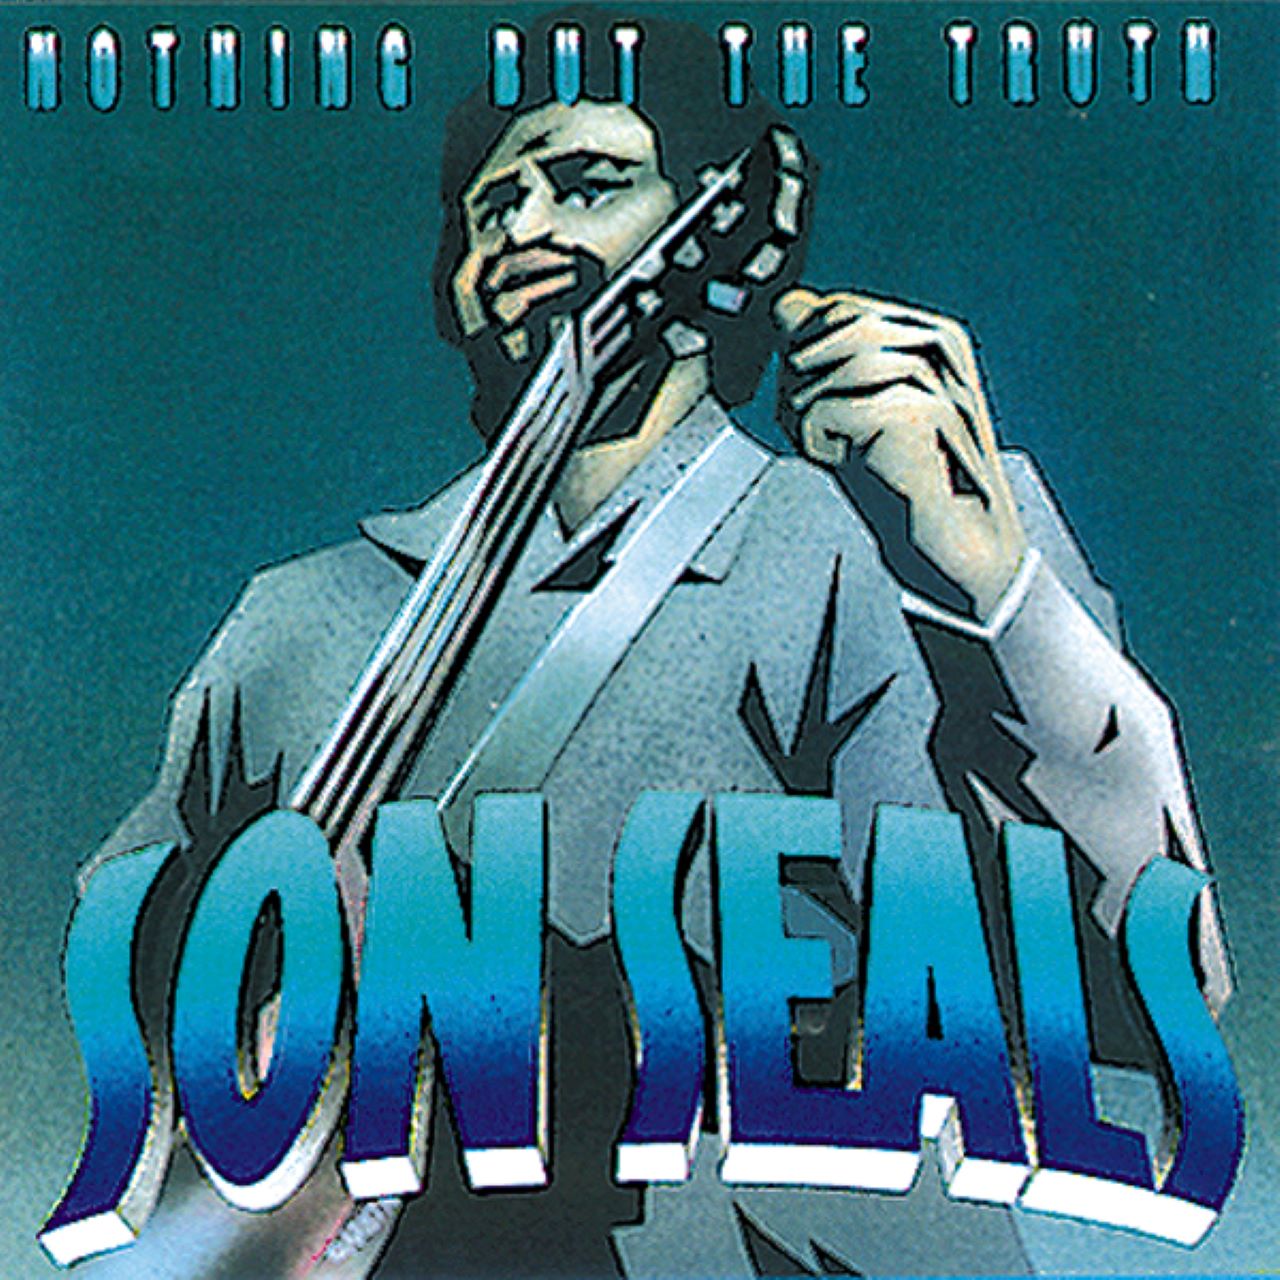 Son Seals – Nothing But The Truth cover album